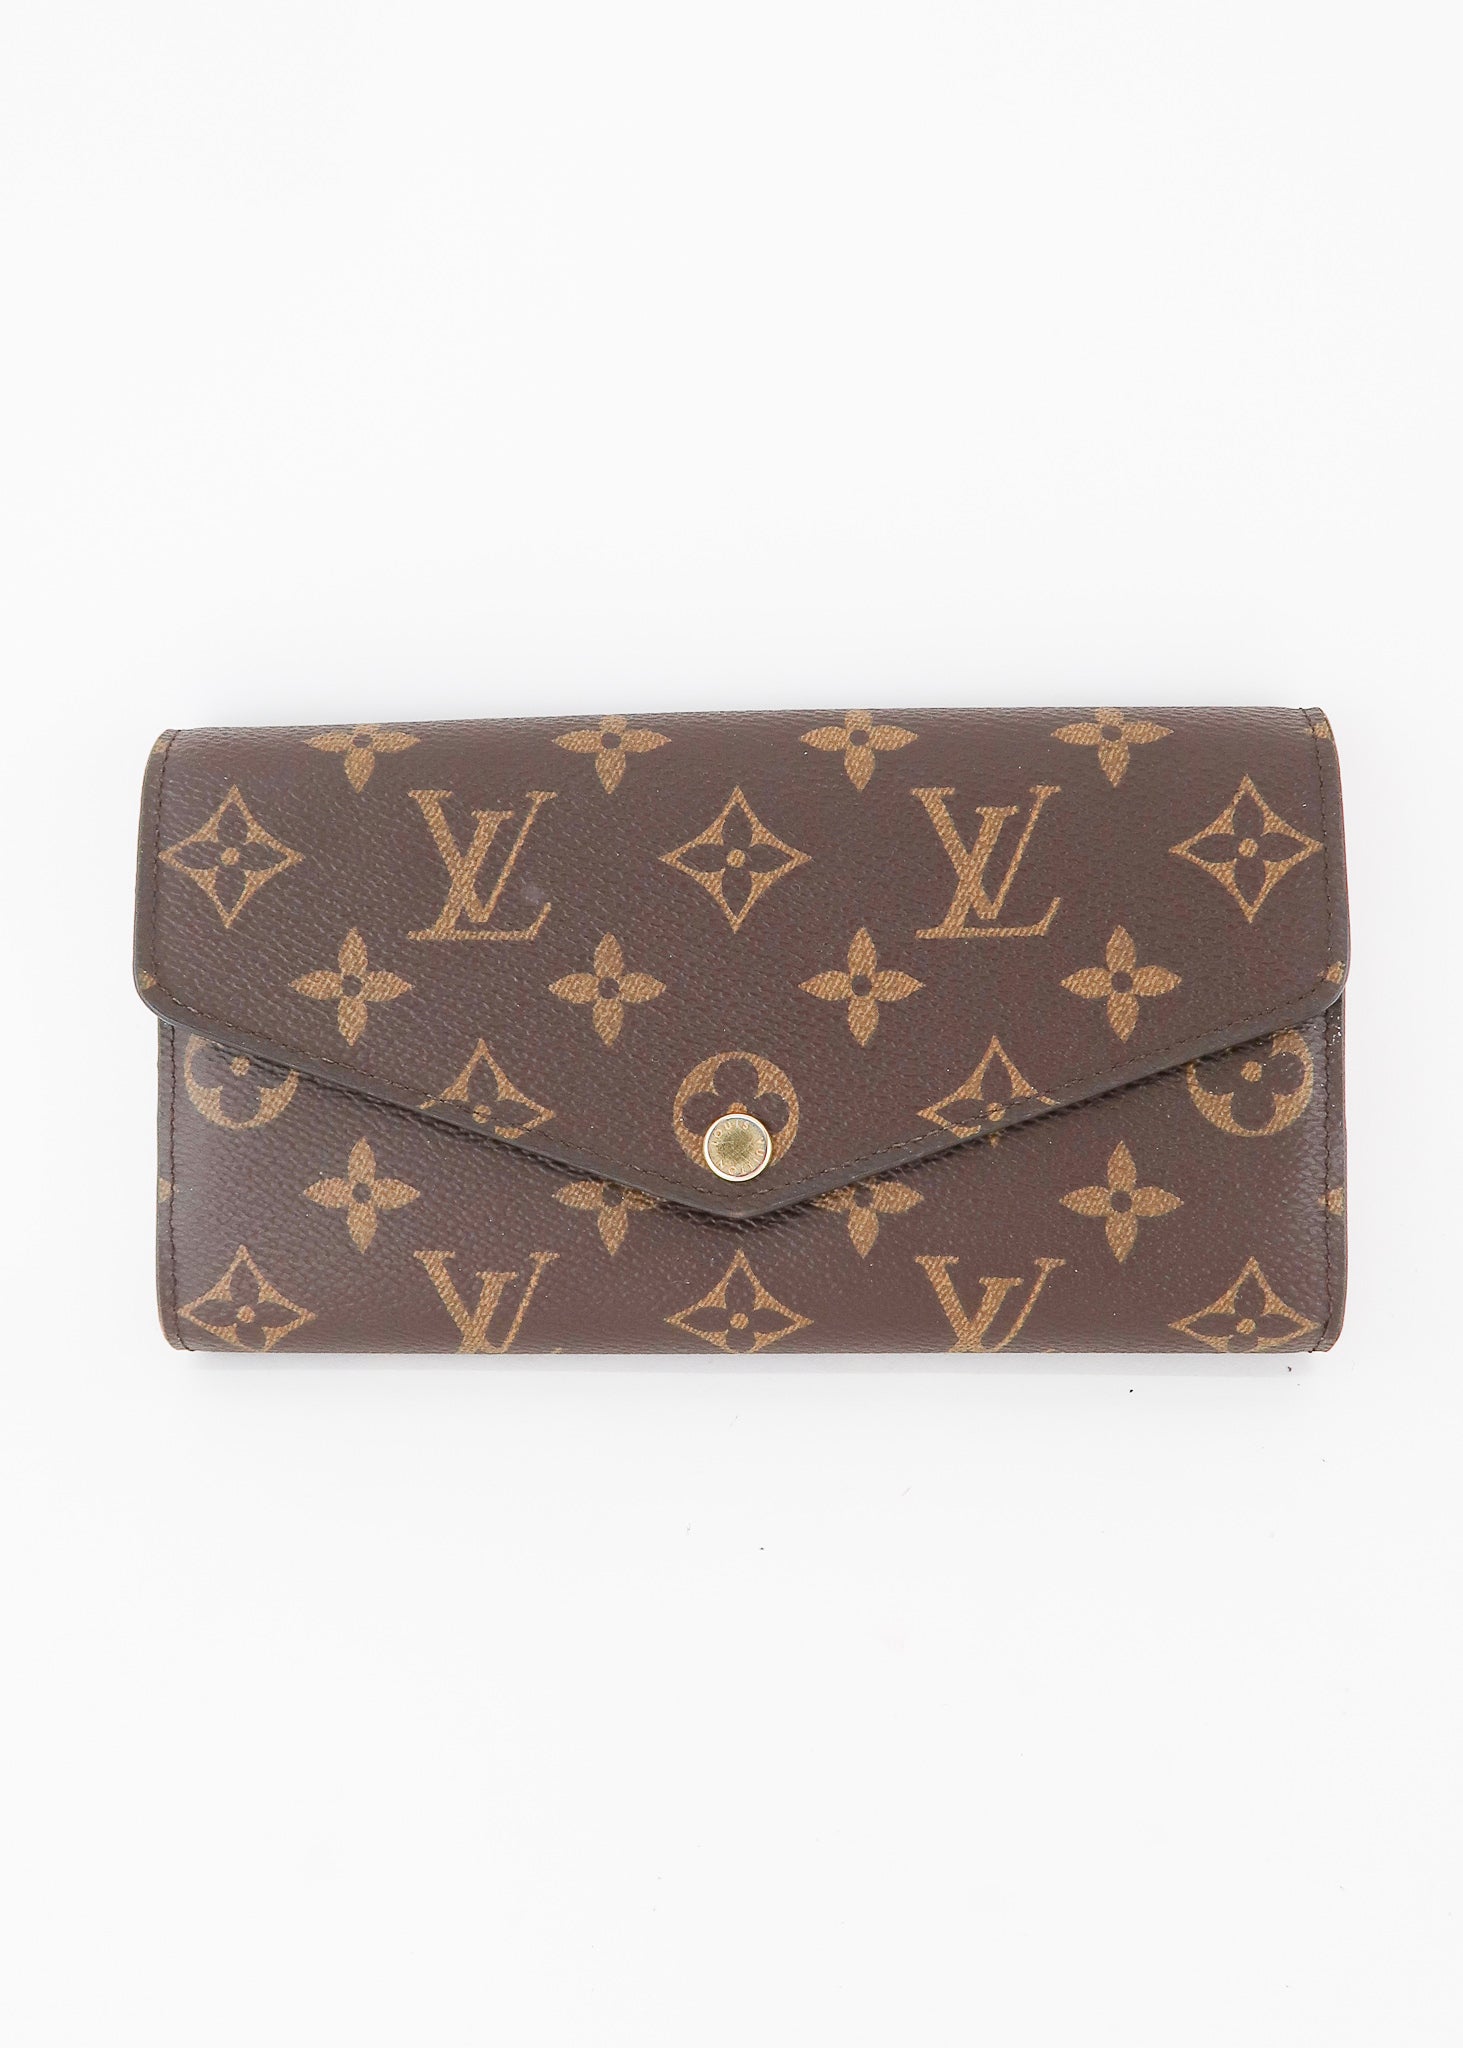 Louis Vuitton checkbook holder  Used louis vuitton, Louis vuitton sarah  wallet, Louis vuitton pouch